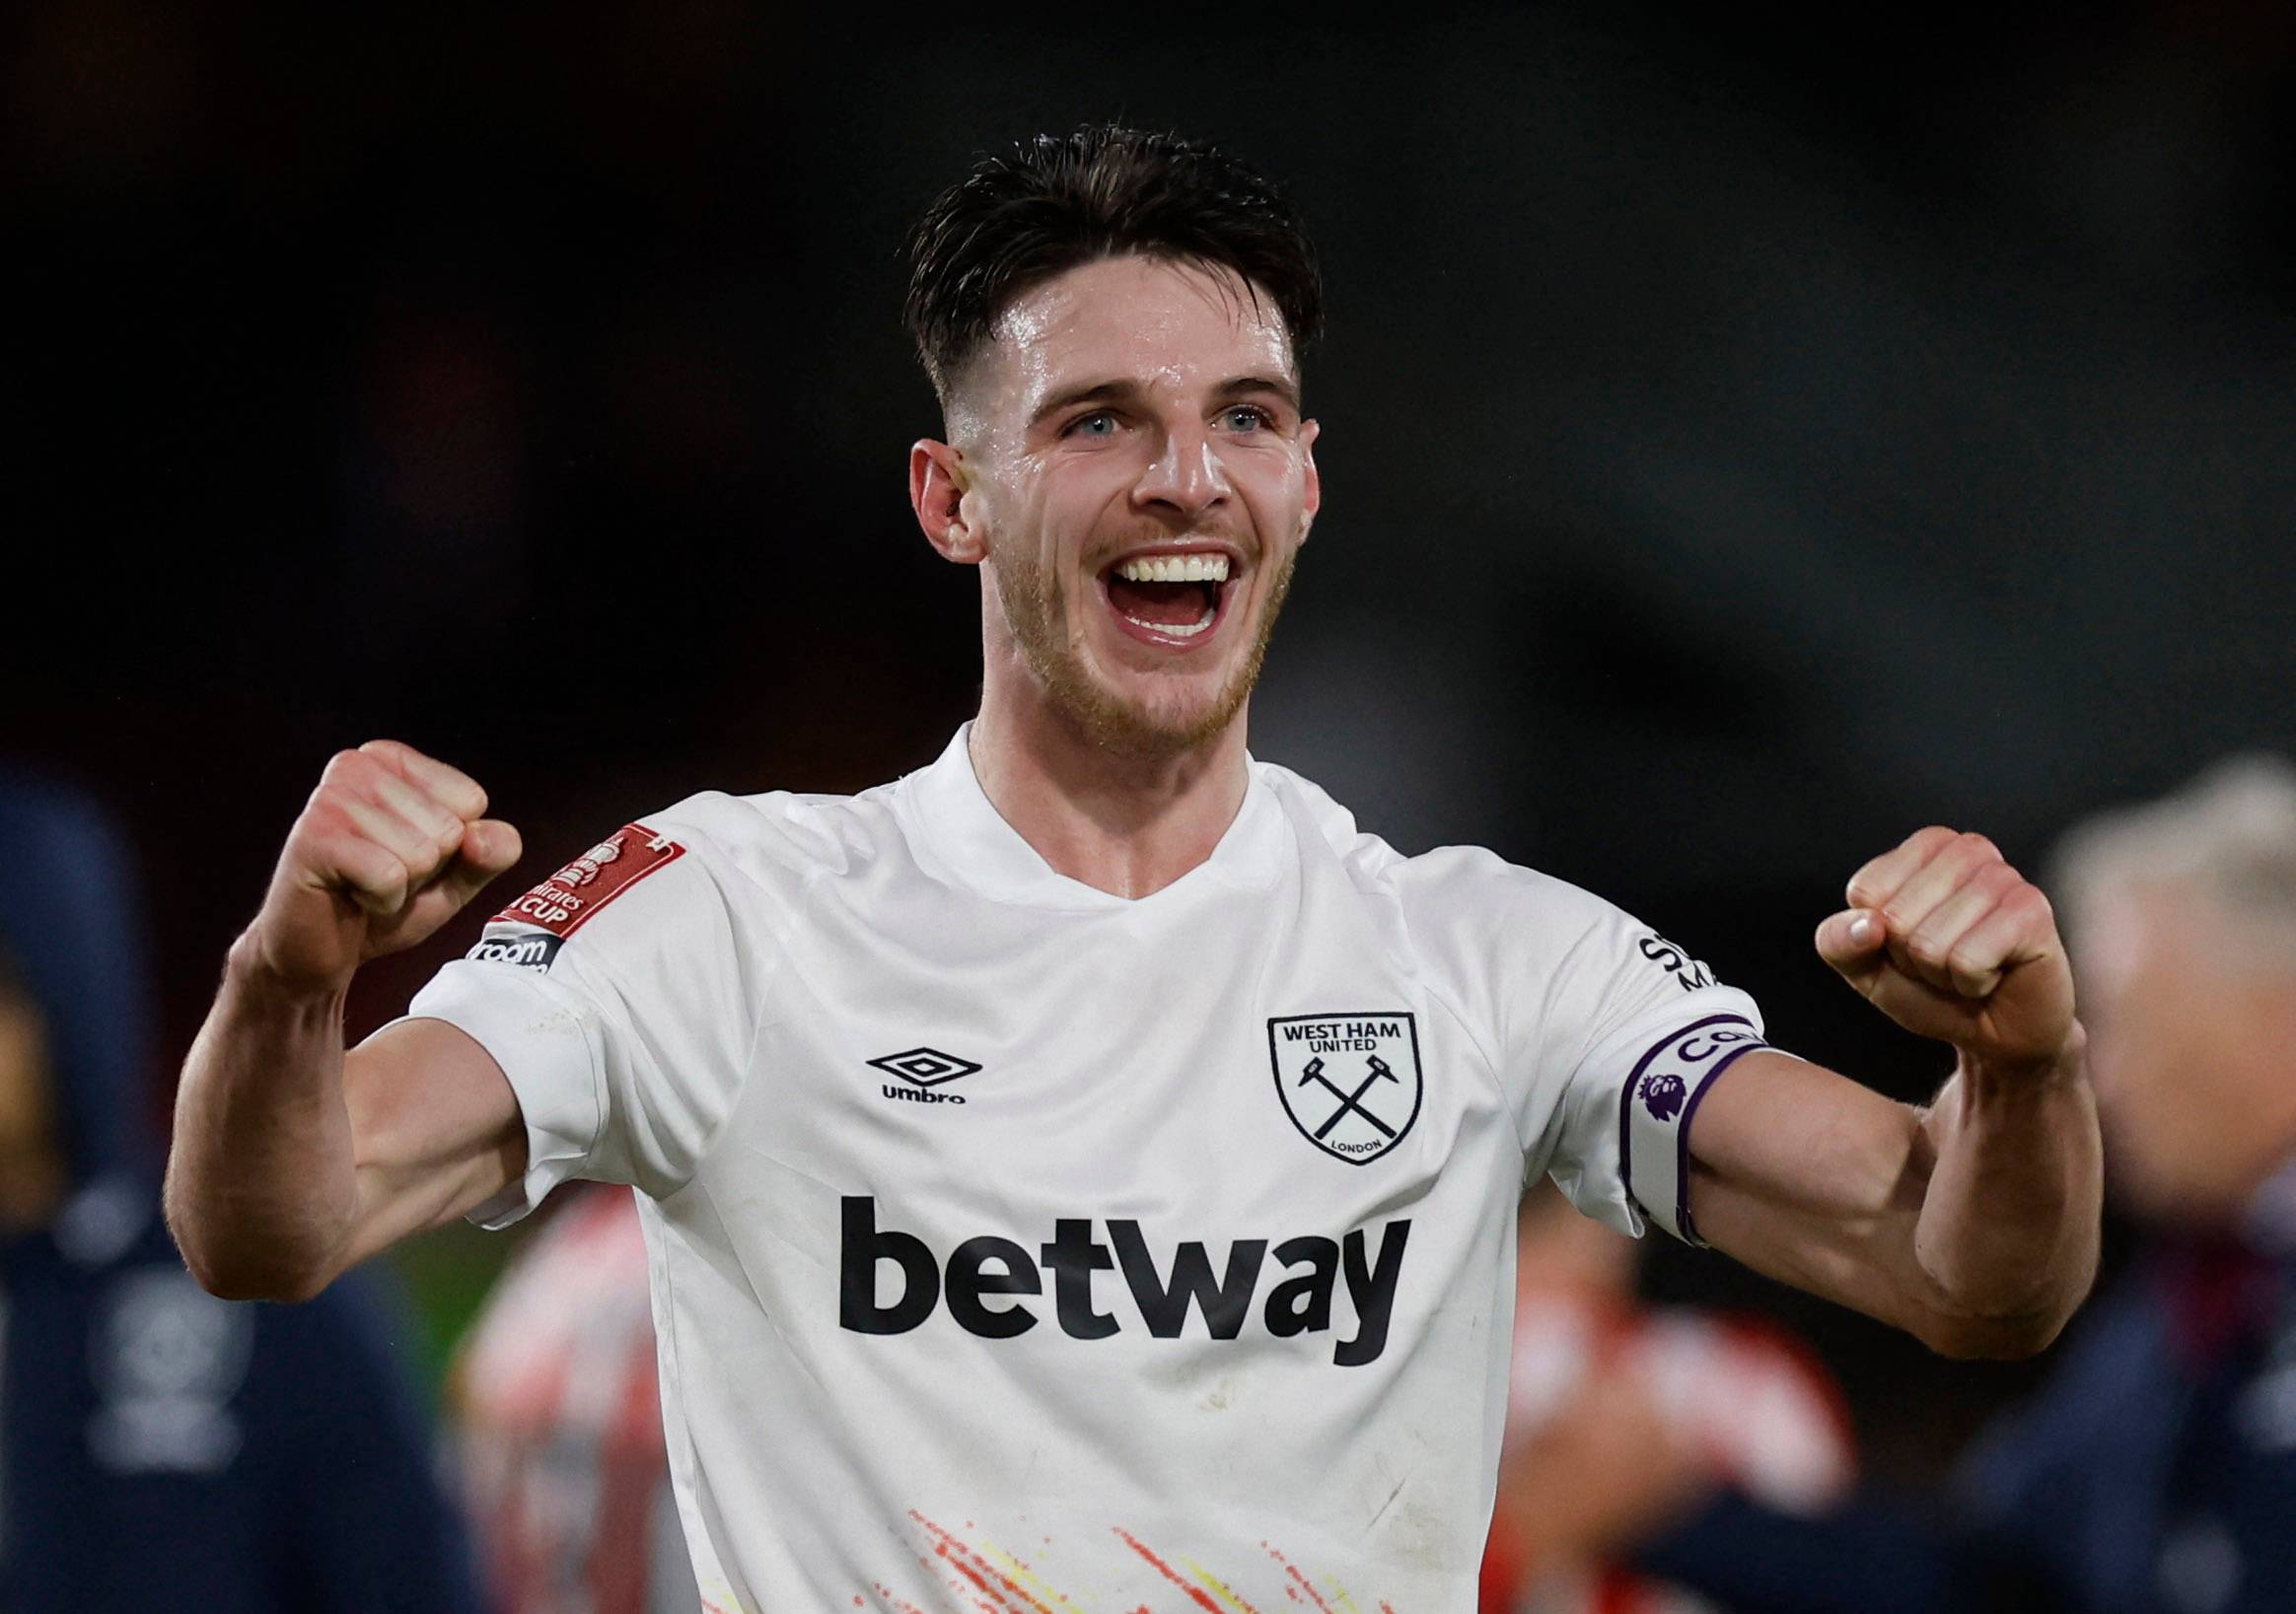 Liverpool 'really interested' in signing Declan Rice - Follow up